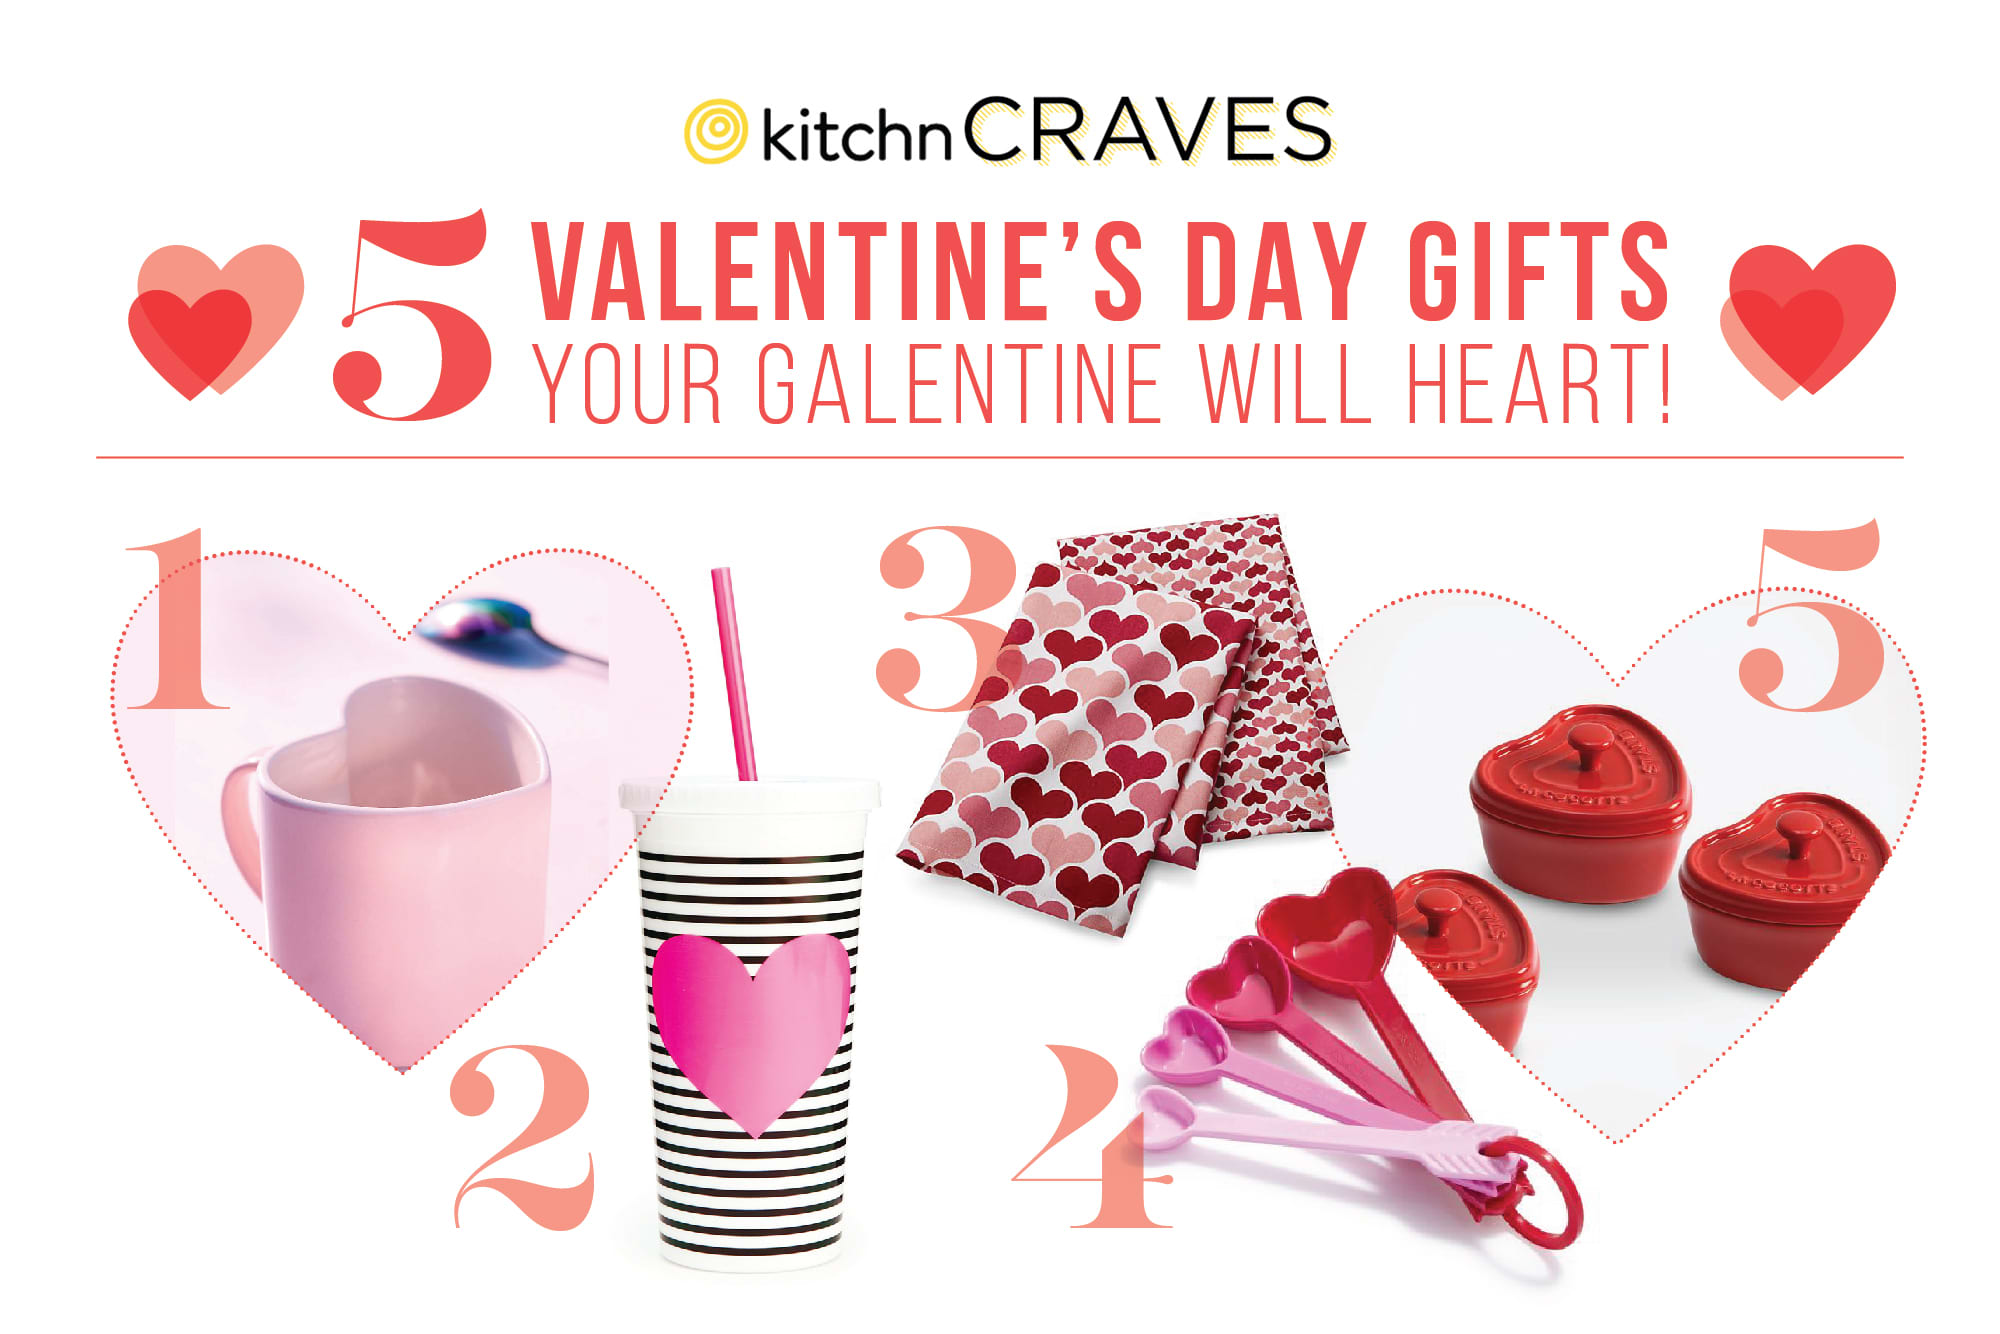 5 Valentine's Day Gifts Your Galentine Will Heart